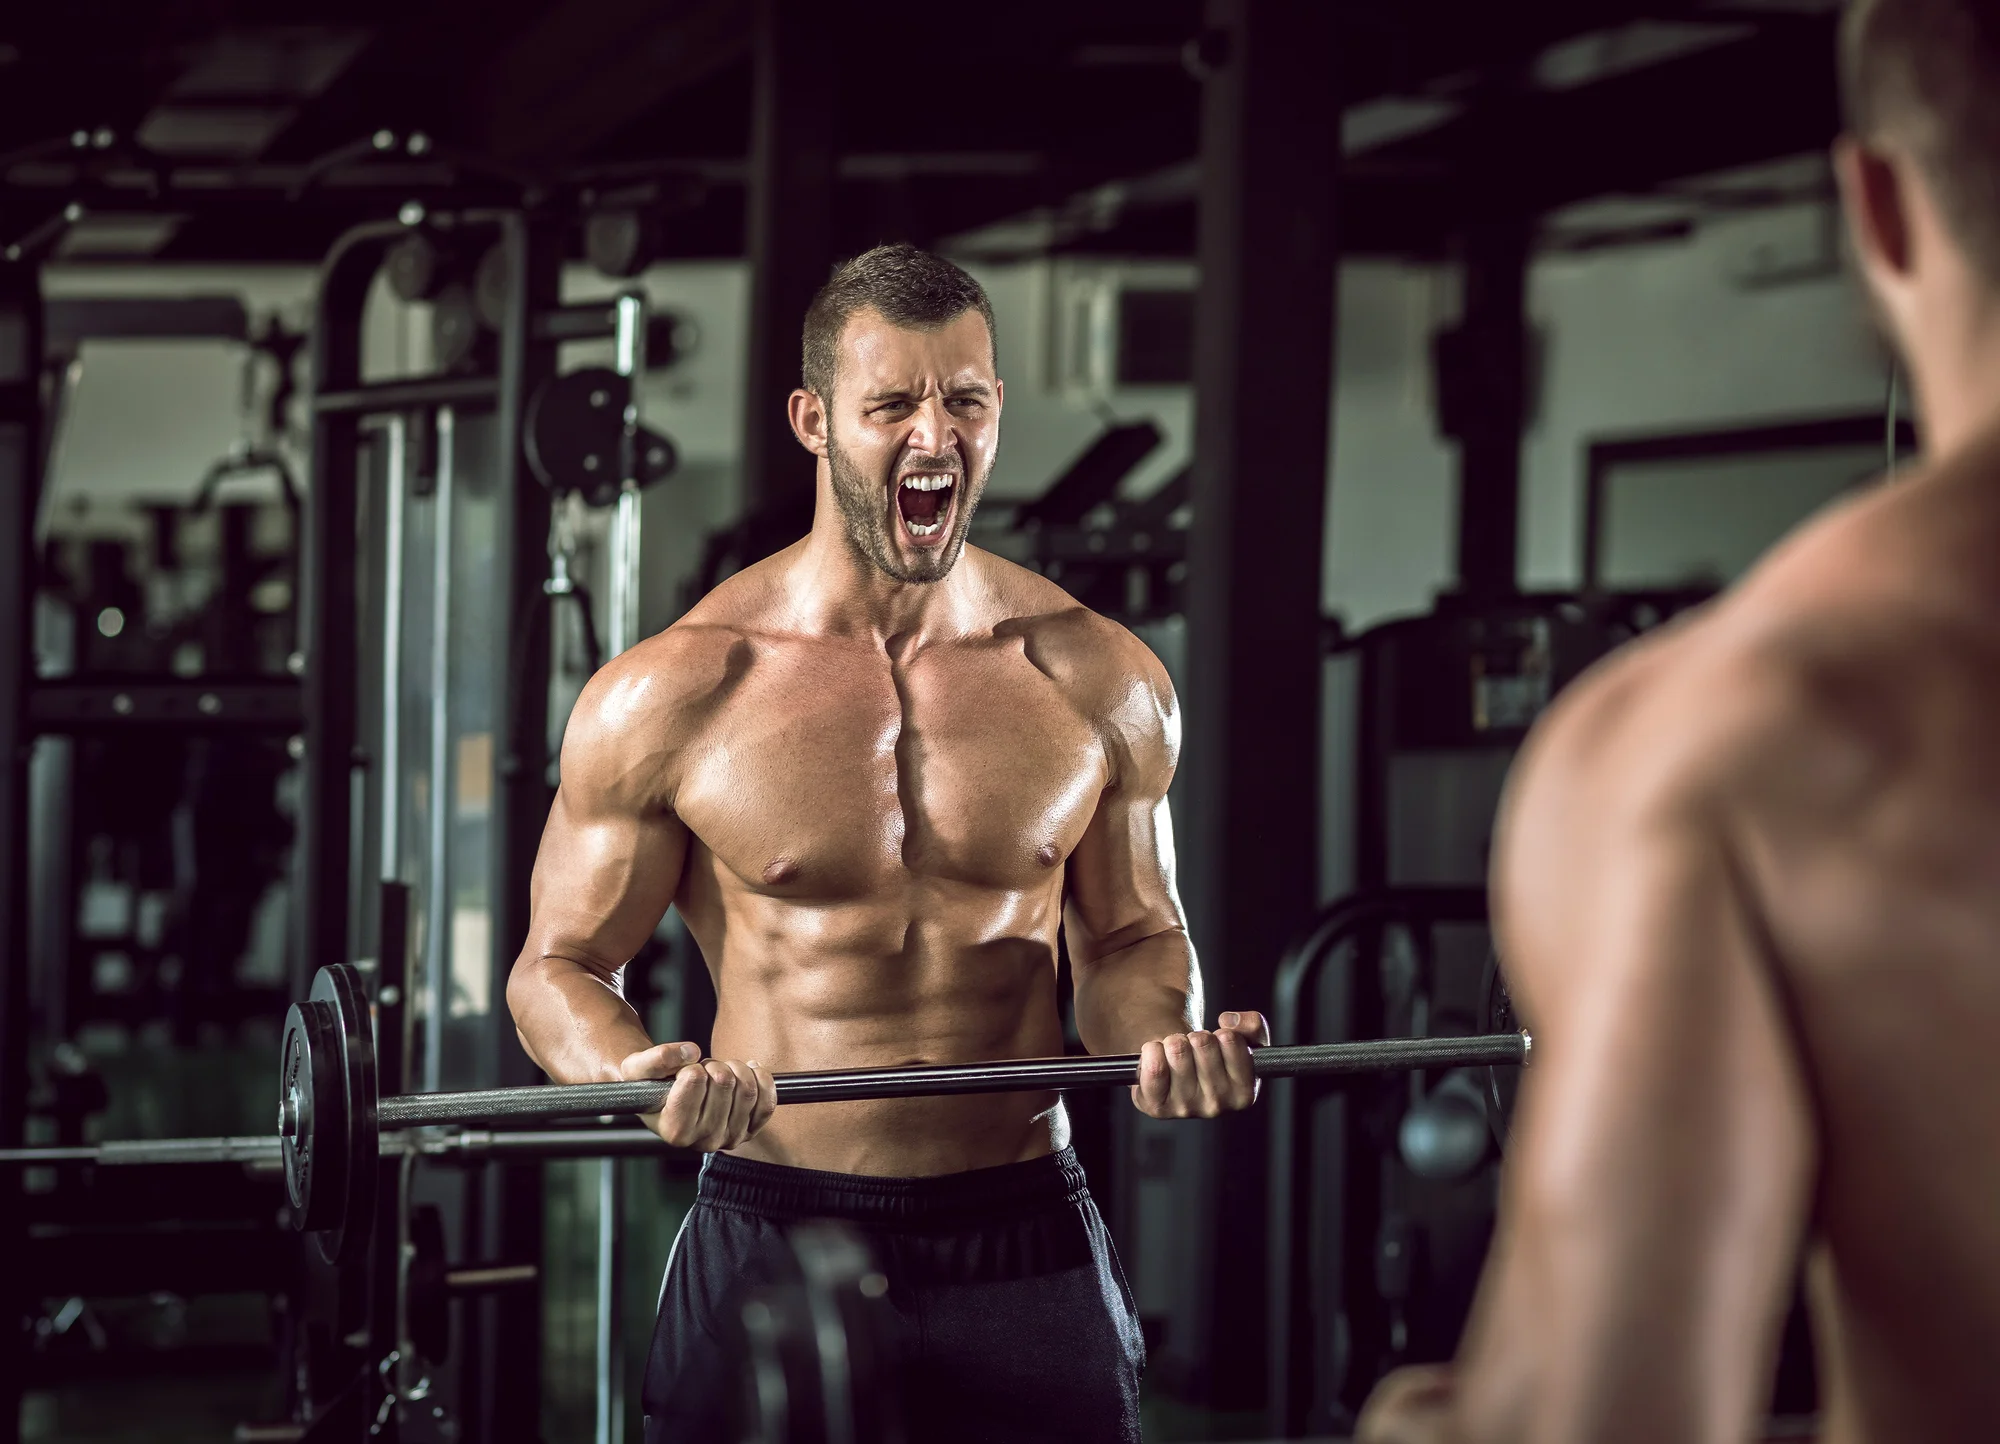 The dynamic form of motivation for the bodybuilder